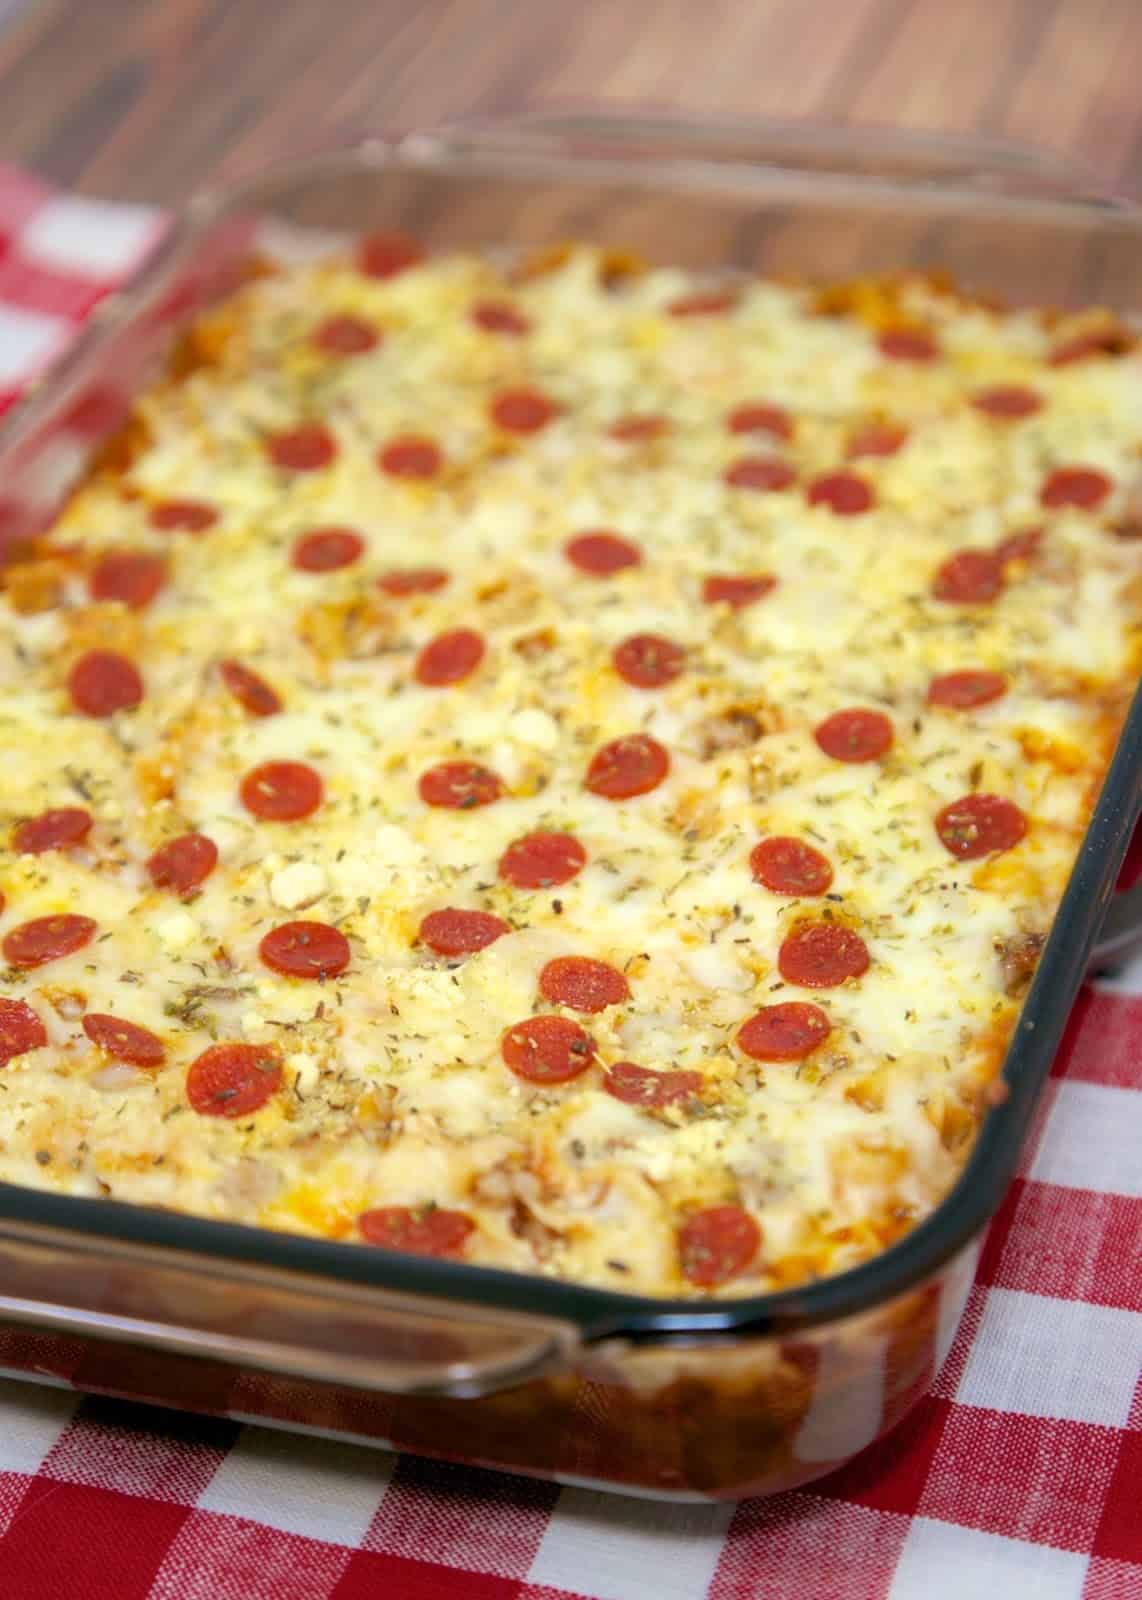 Pizza Pasta Bake - cheesy pasta bake with pizza sauce and your favorite pizza toppings! Hamburger or sausage, egg noodles, cheese soup, mozzarella cheese, parmesan cheese and pepperoni. Great weeknight meal! Kid-friendly and a good freezer meal! We love this easy pasta casserole recipe!